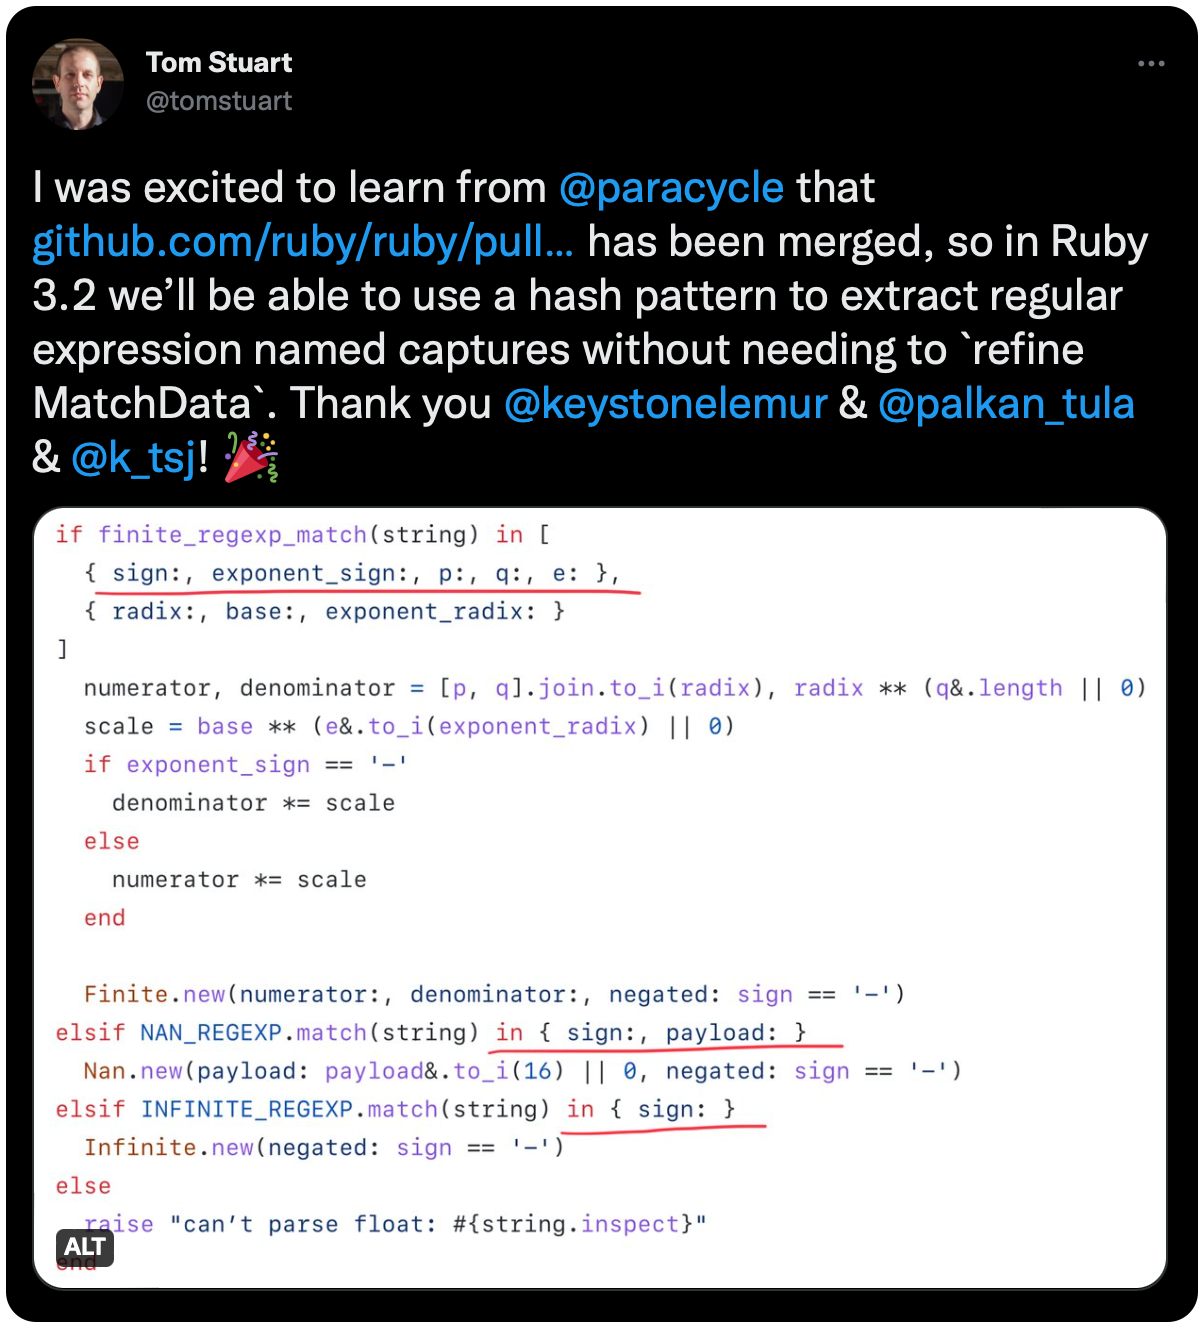 I was excited to learn from @paracycle that https://t.co/2Jf15unEpZ has been merged, so in Ruby 3.2 we’ll be able to use a hash pattern to extract regular expression named captures without needing to `refine MatchData`. Thank you @keystonelemur &amp; @palkan_tula &amp; @k_tsj! 🎉 